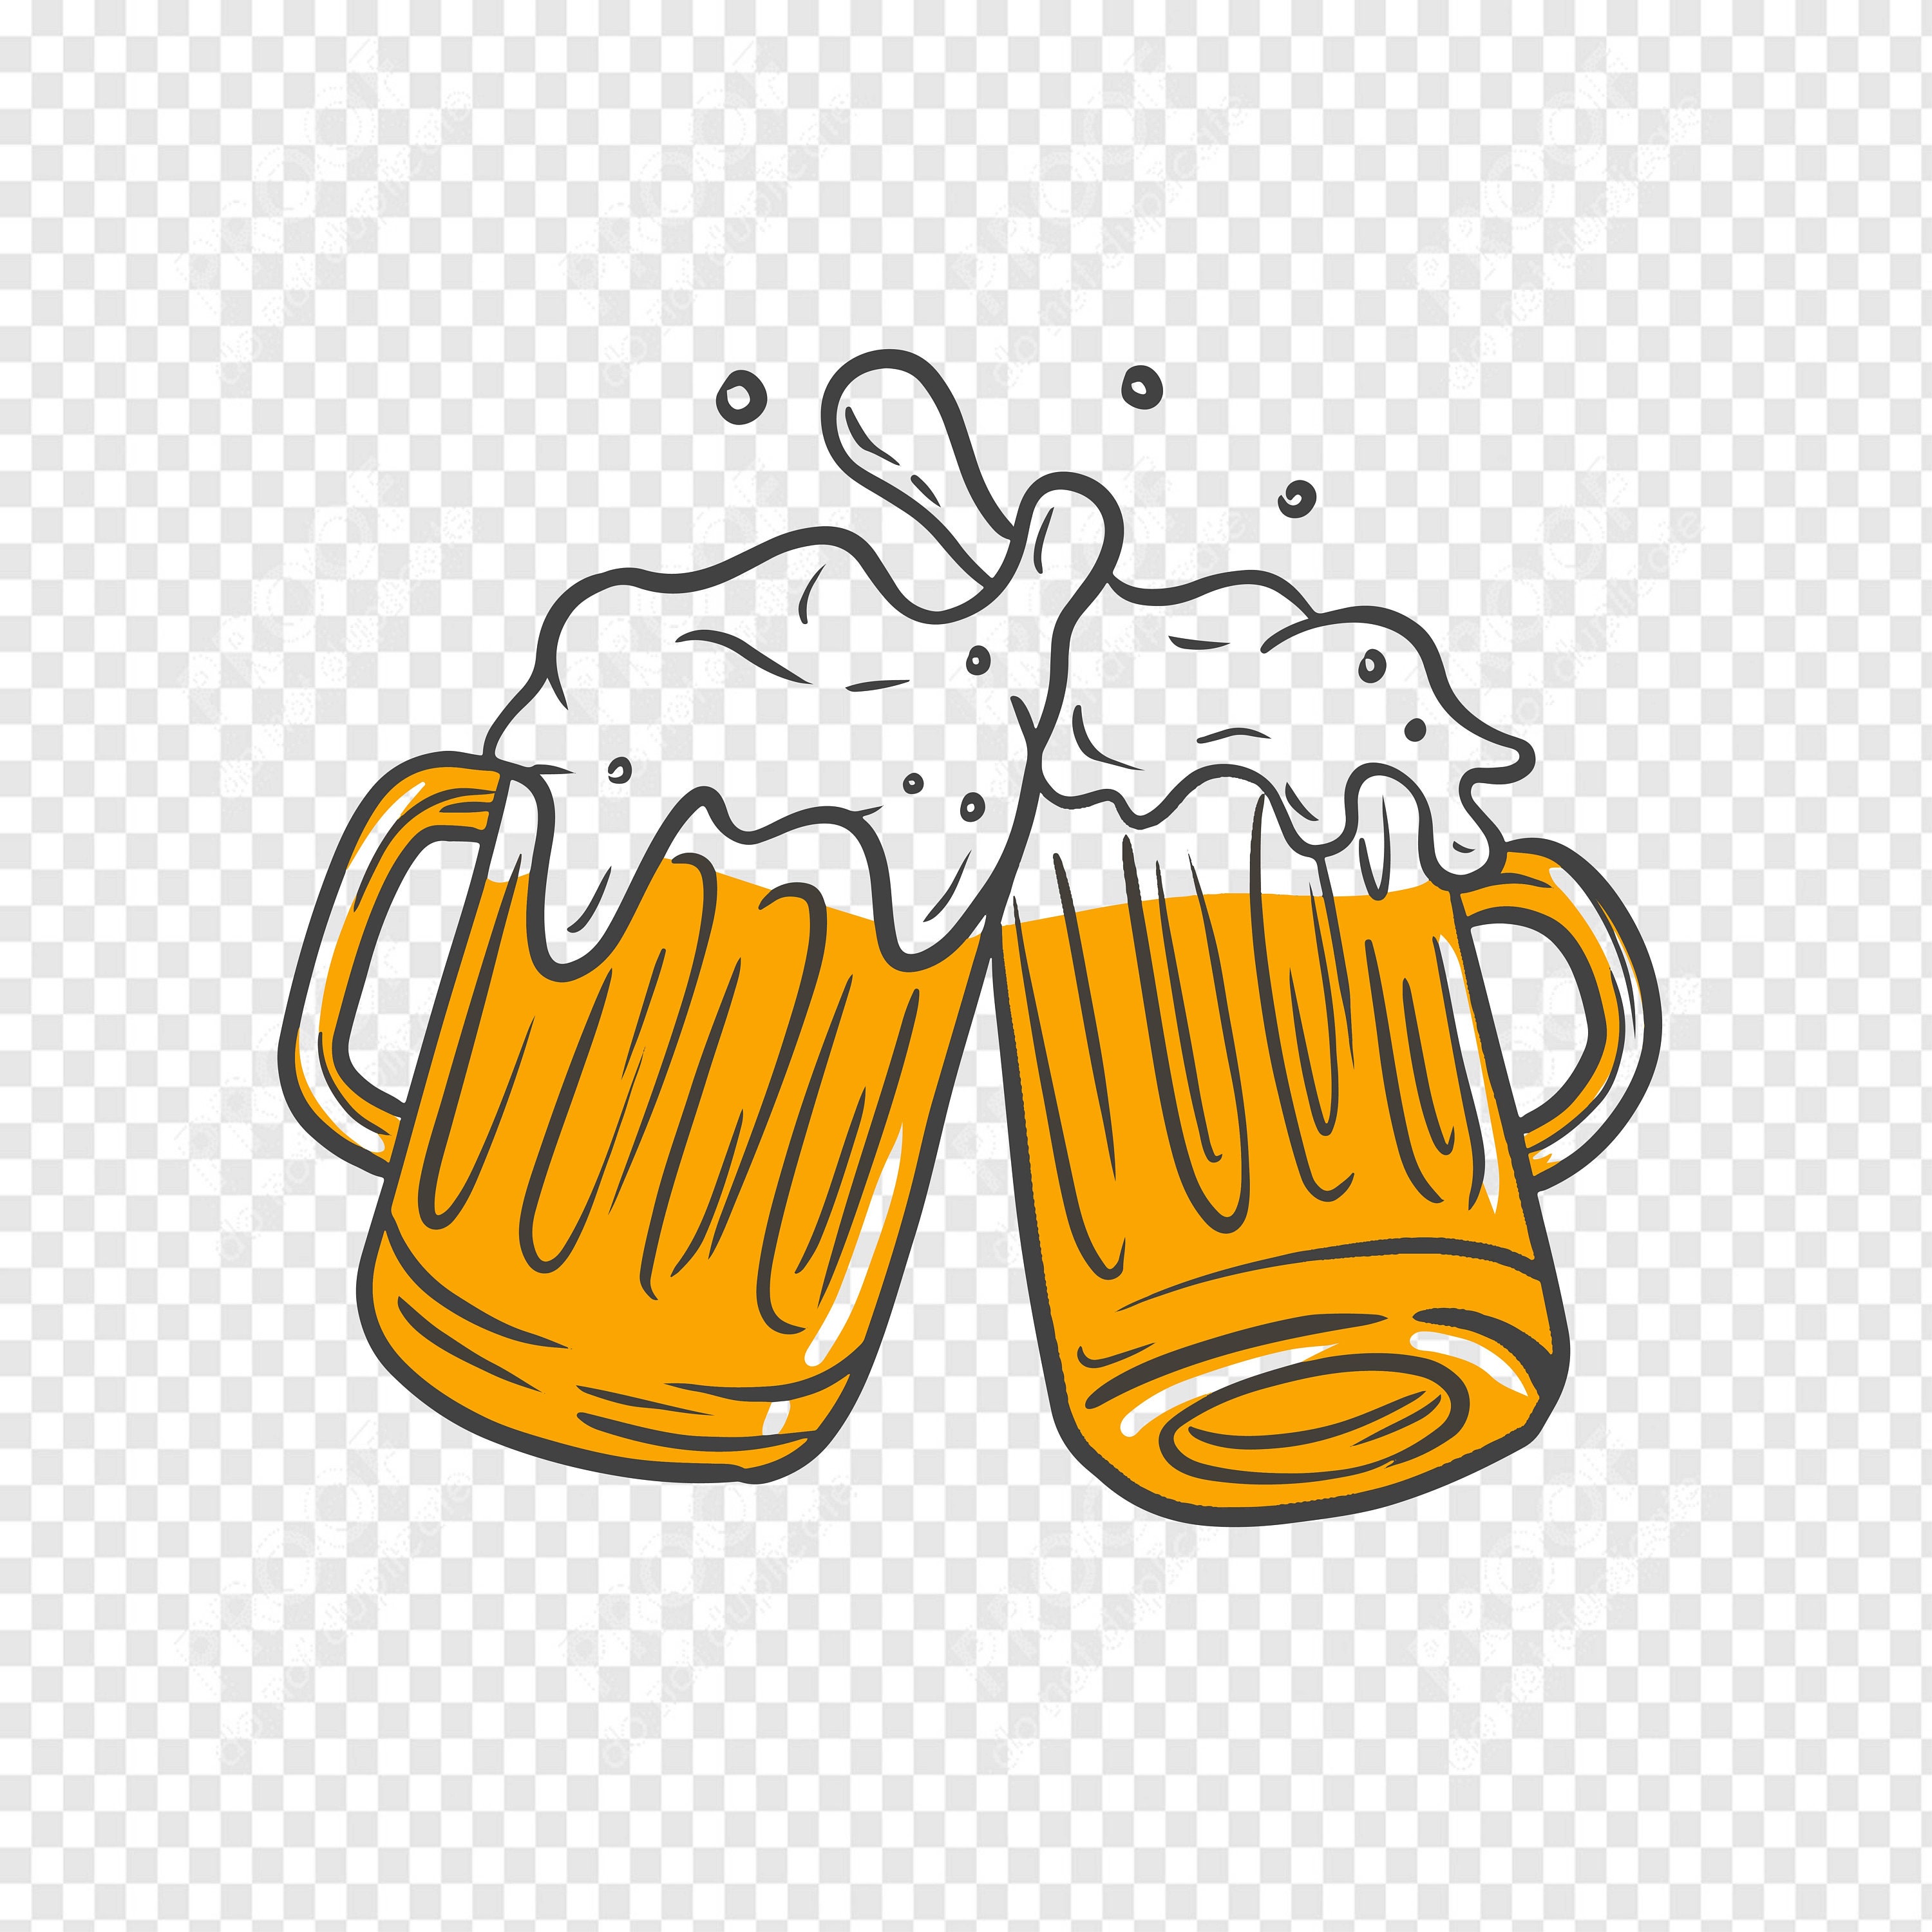 Cheers beer cups graphic Royalty Free Vector Image